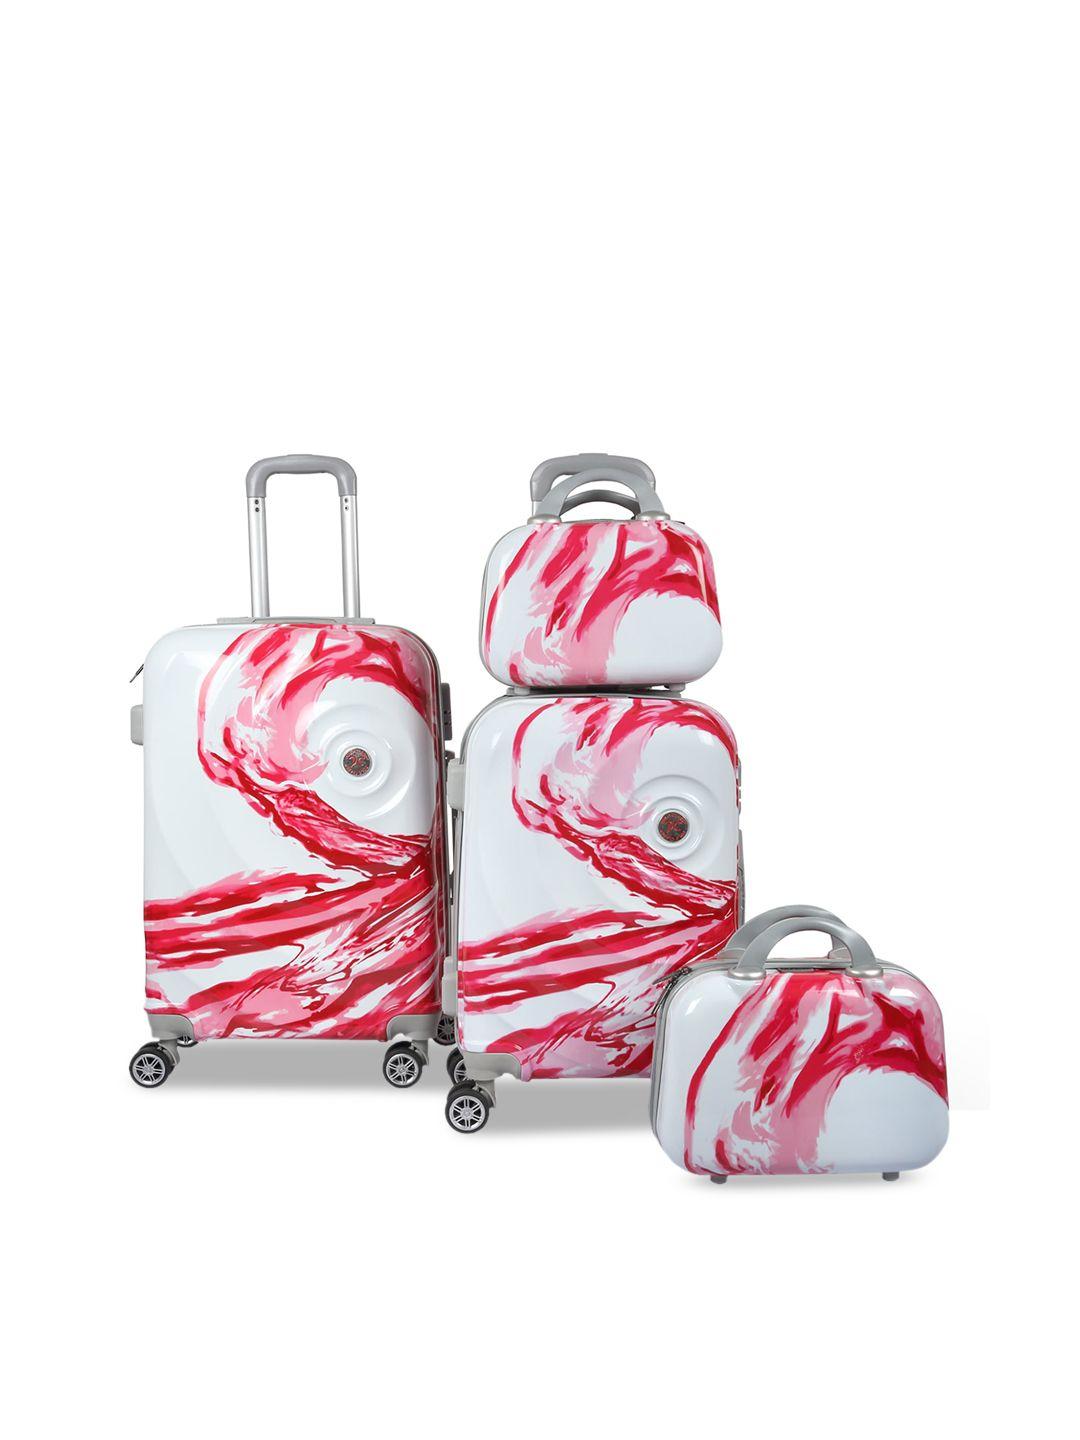 polo class red & white printed set of 4 travelling bag